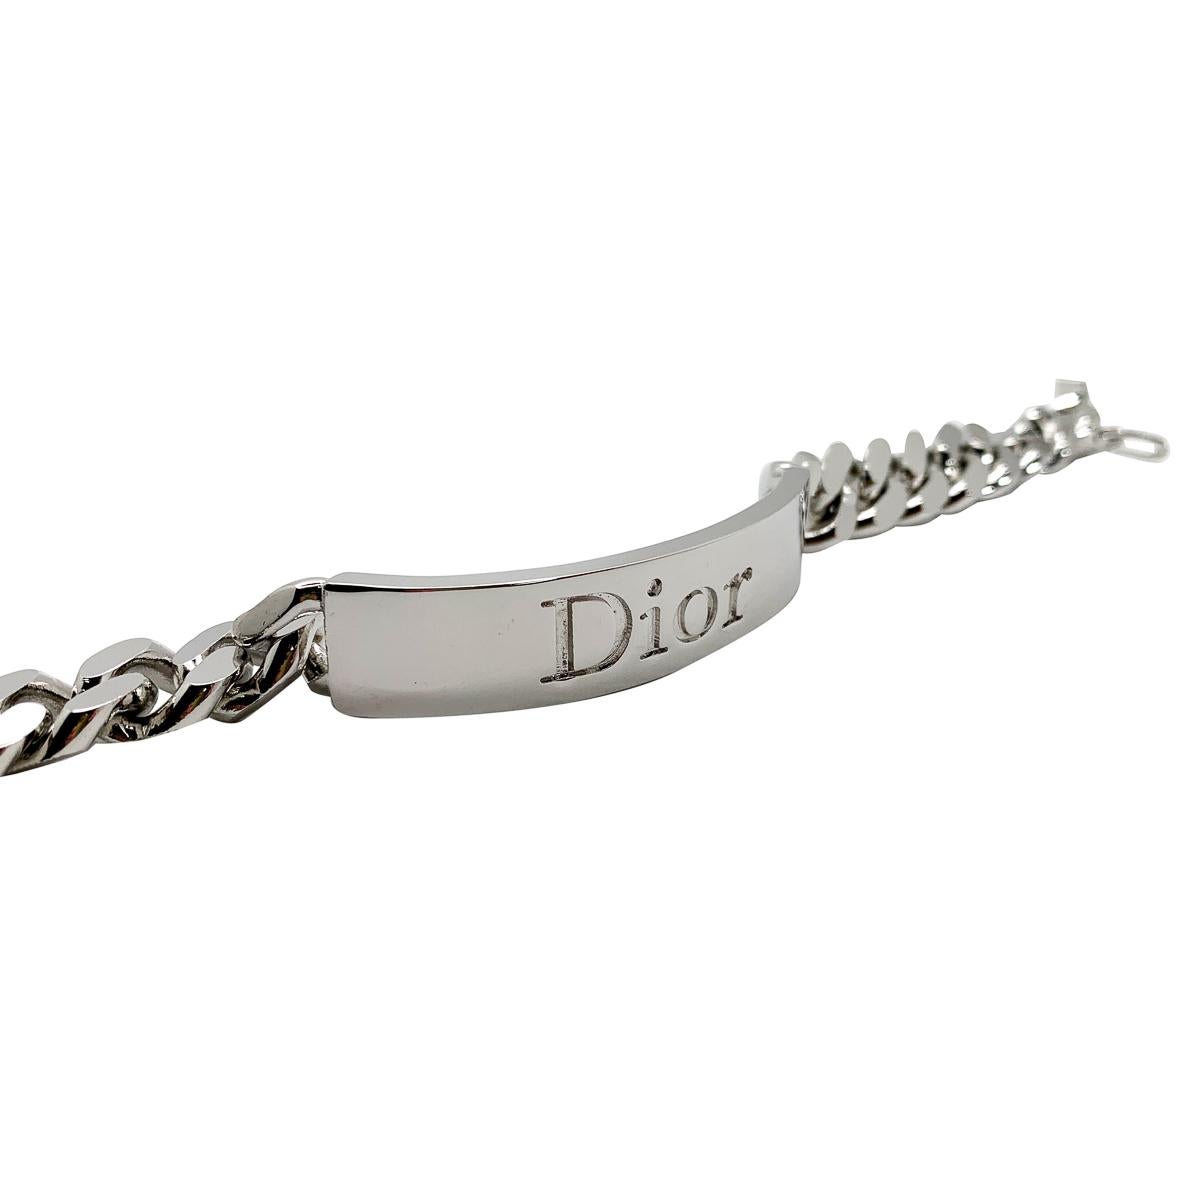 A chunky vintage Dior ID bracelet. Featuring a chunky flattened curb with a Dior inscribed identity bar.
With archive pieces from her own Dior collection displayed in London's highly acclaimed Dior Designer of Dreams Exhibition, Jennifer understands